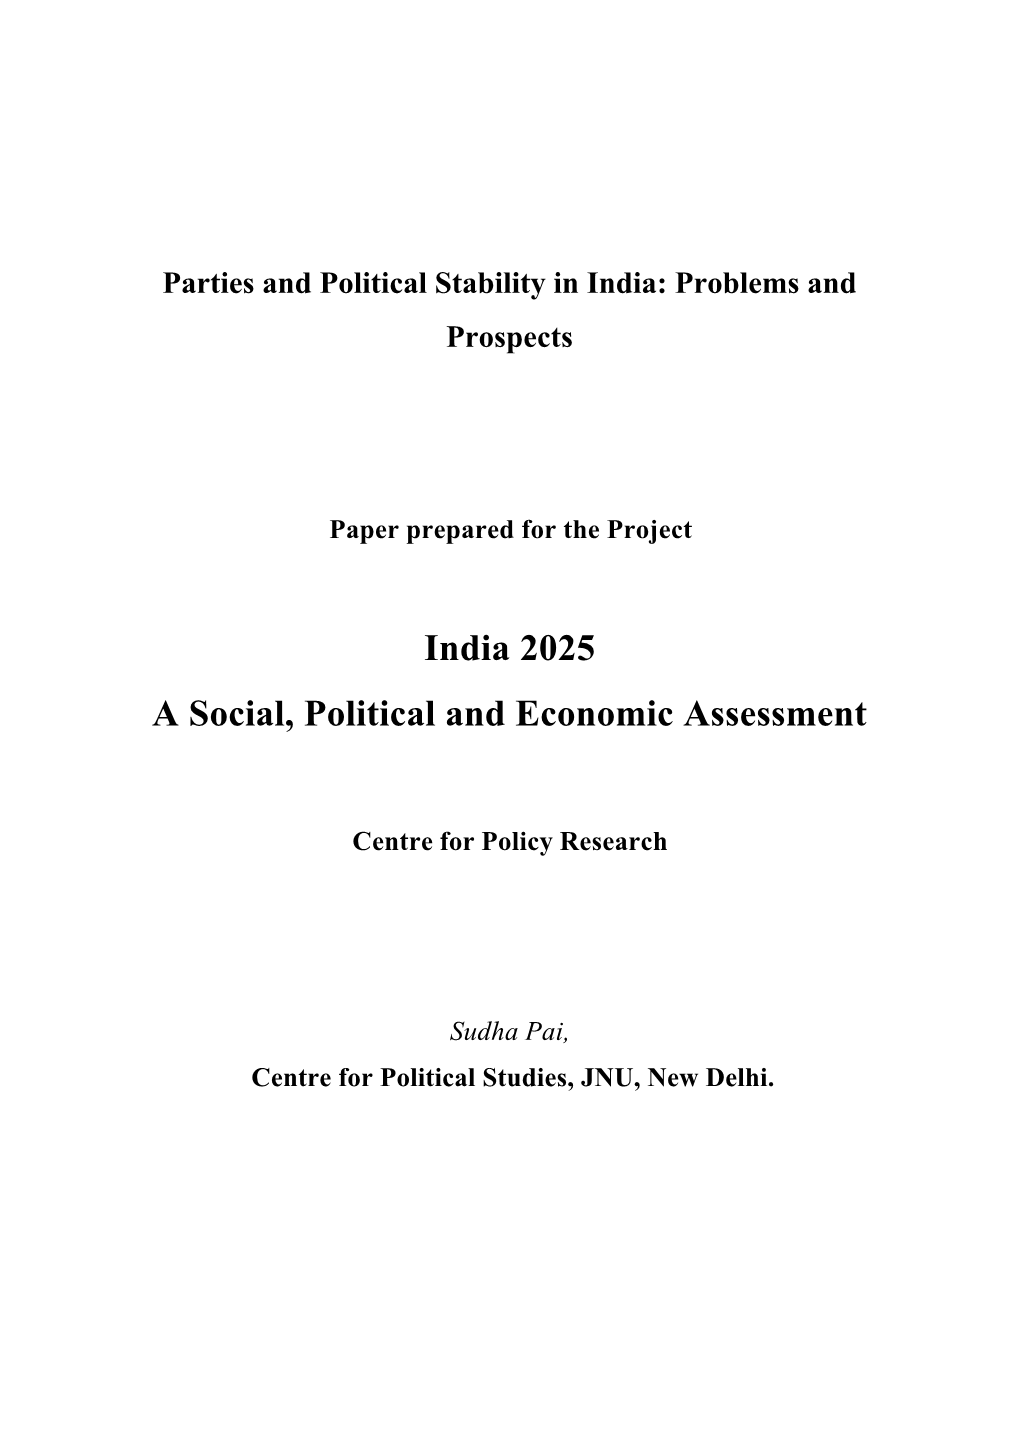 India 2025 a Social, Political and Economic Assessment